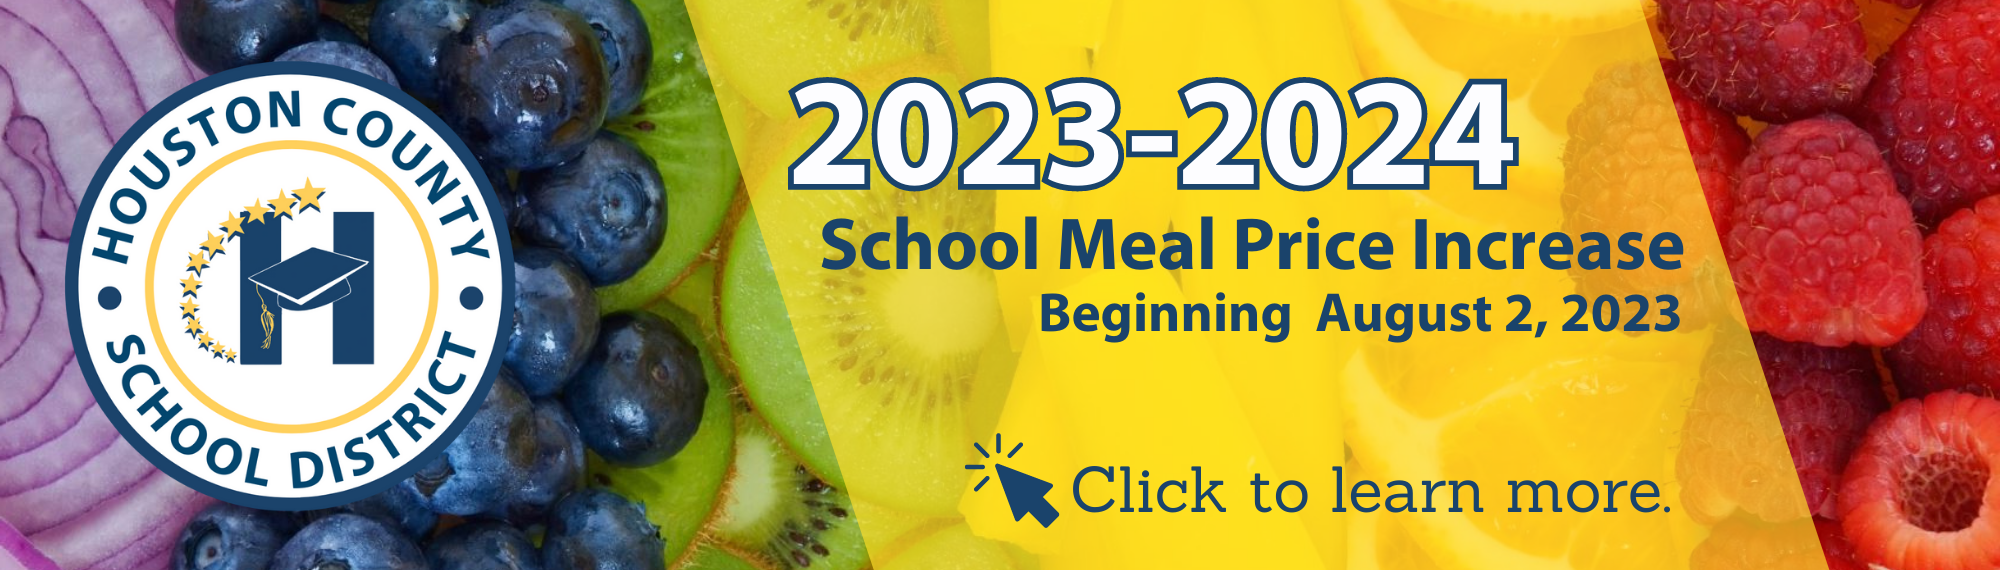 School Meal Price Increase